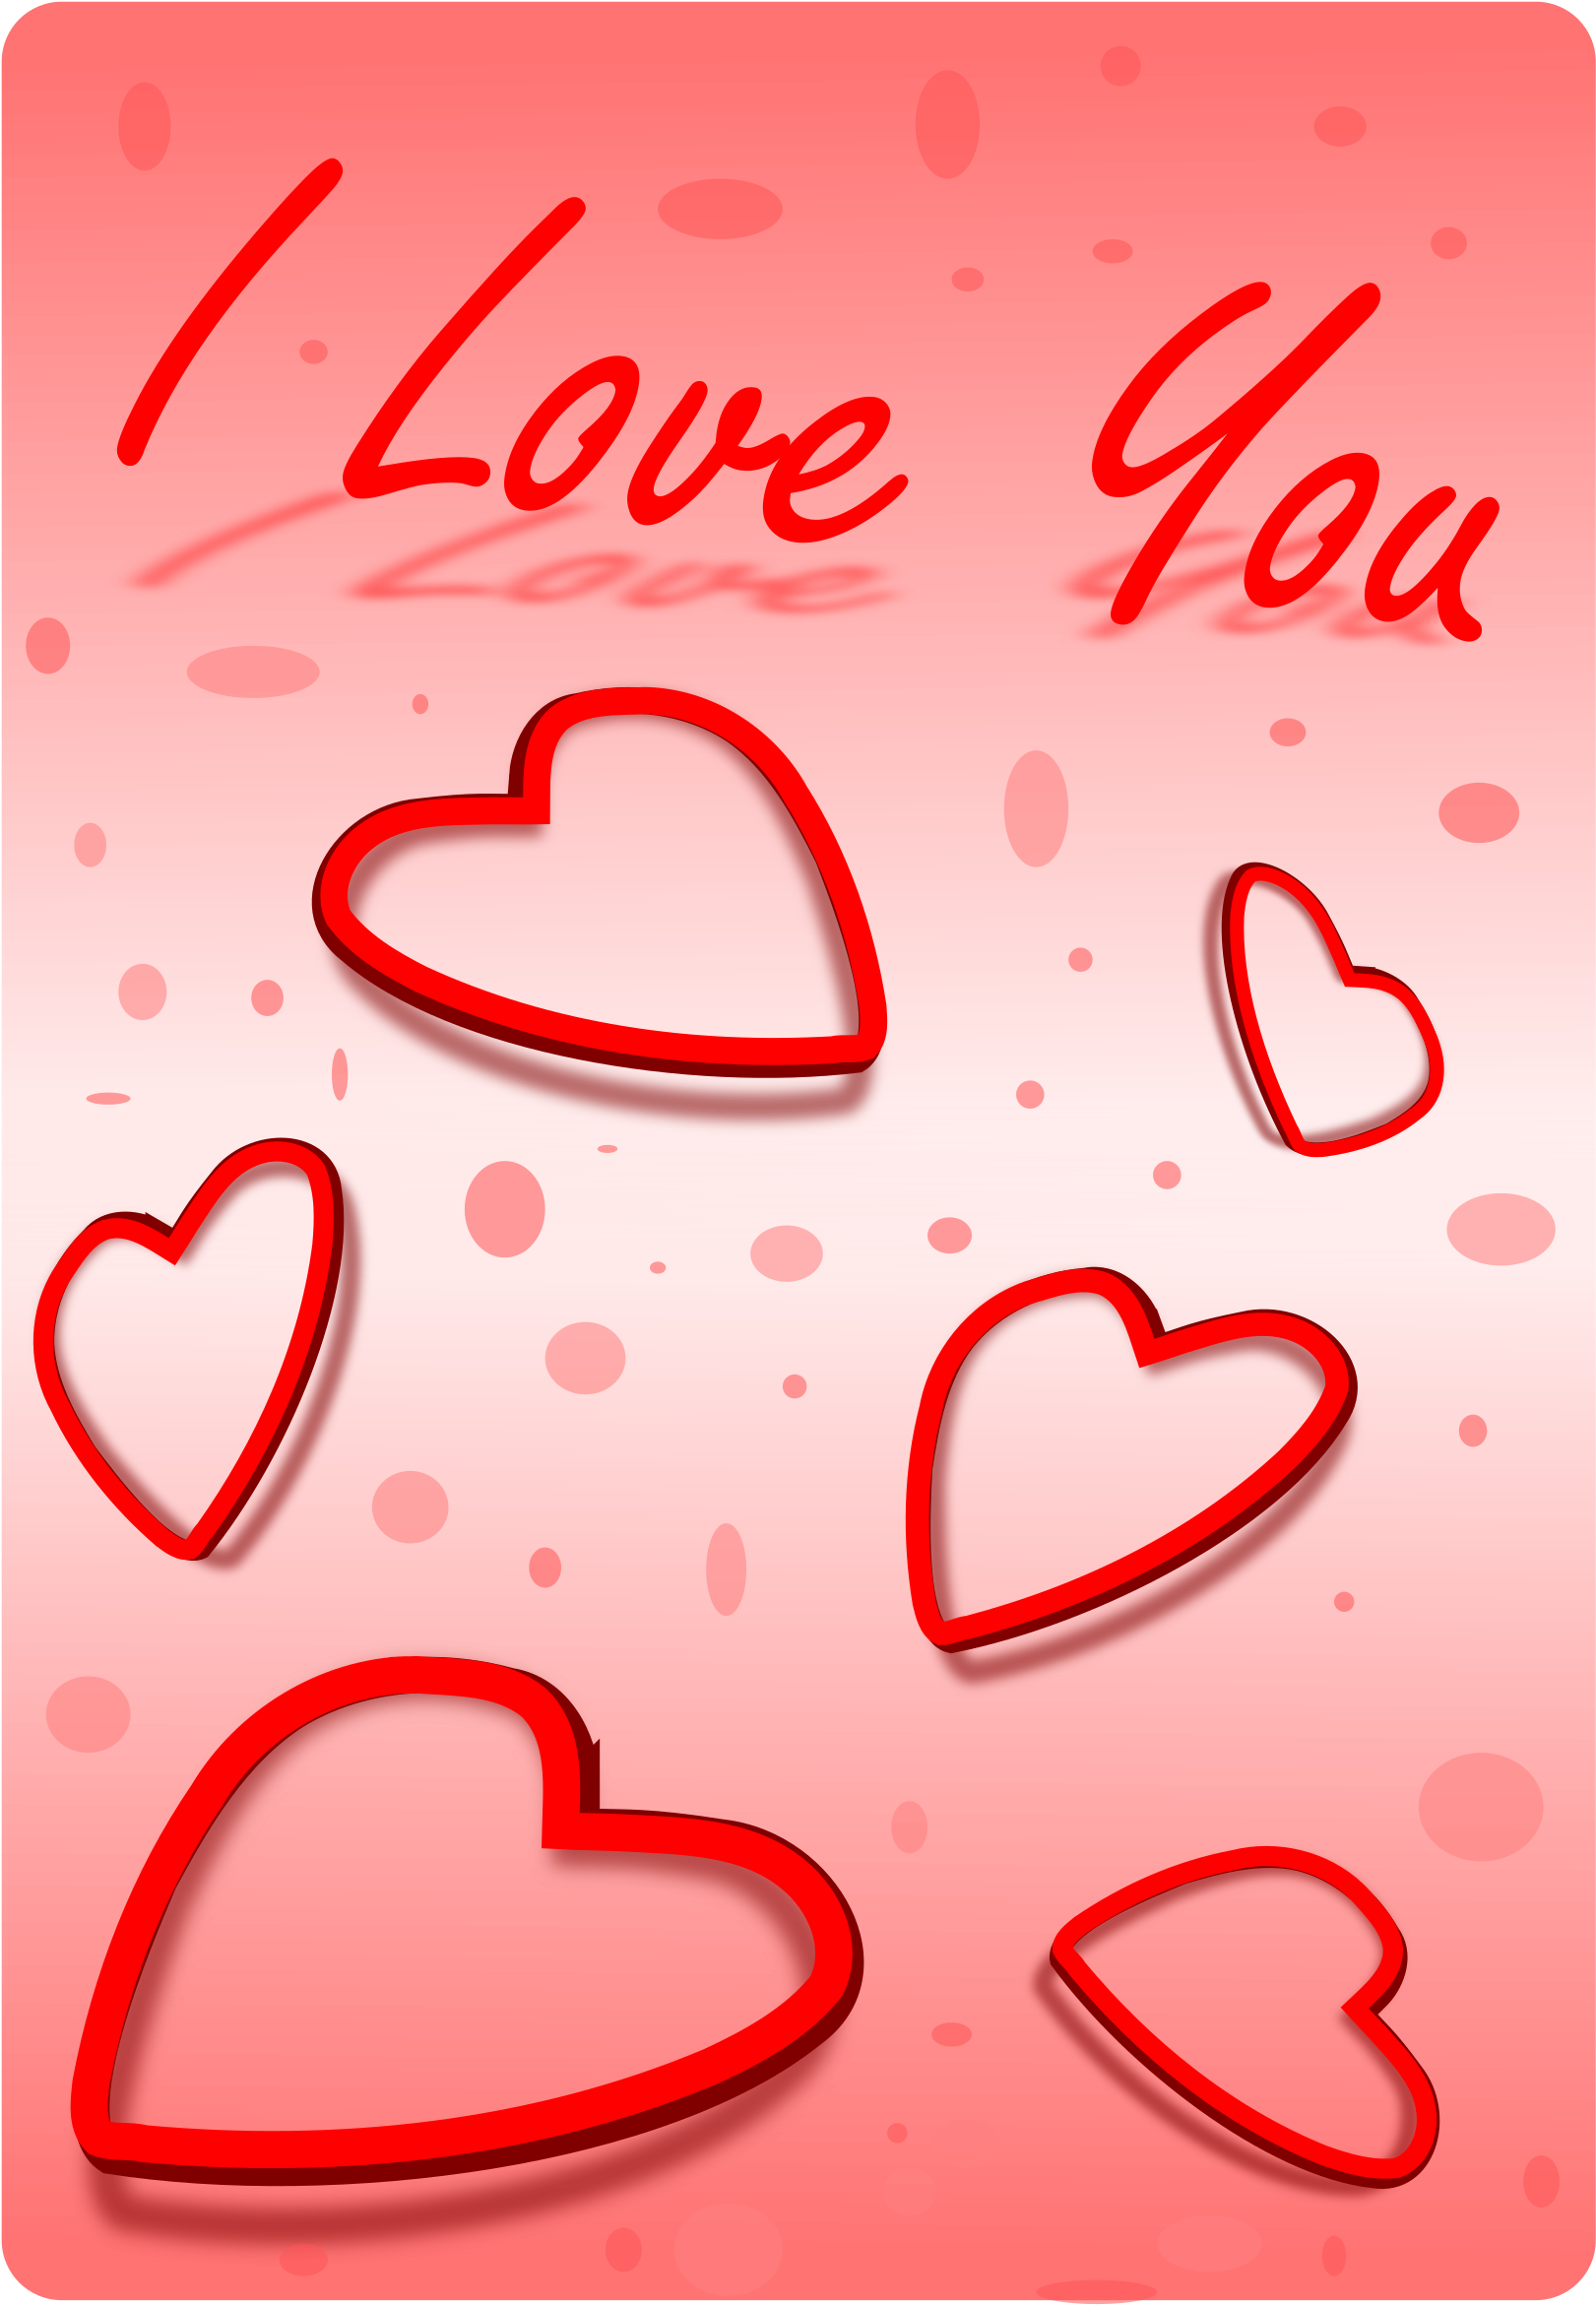 A Red Heart With Words